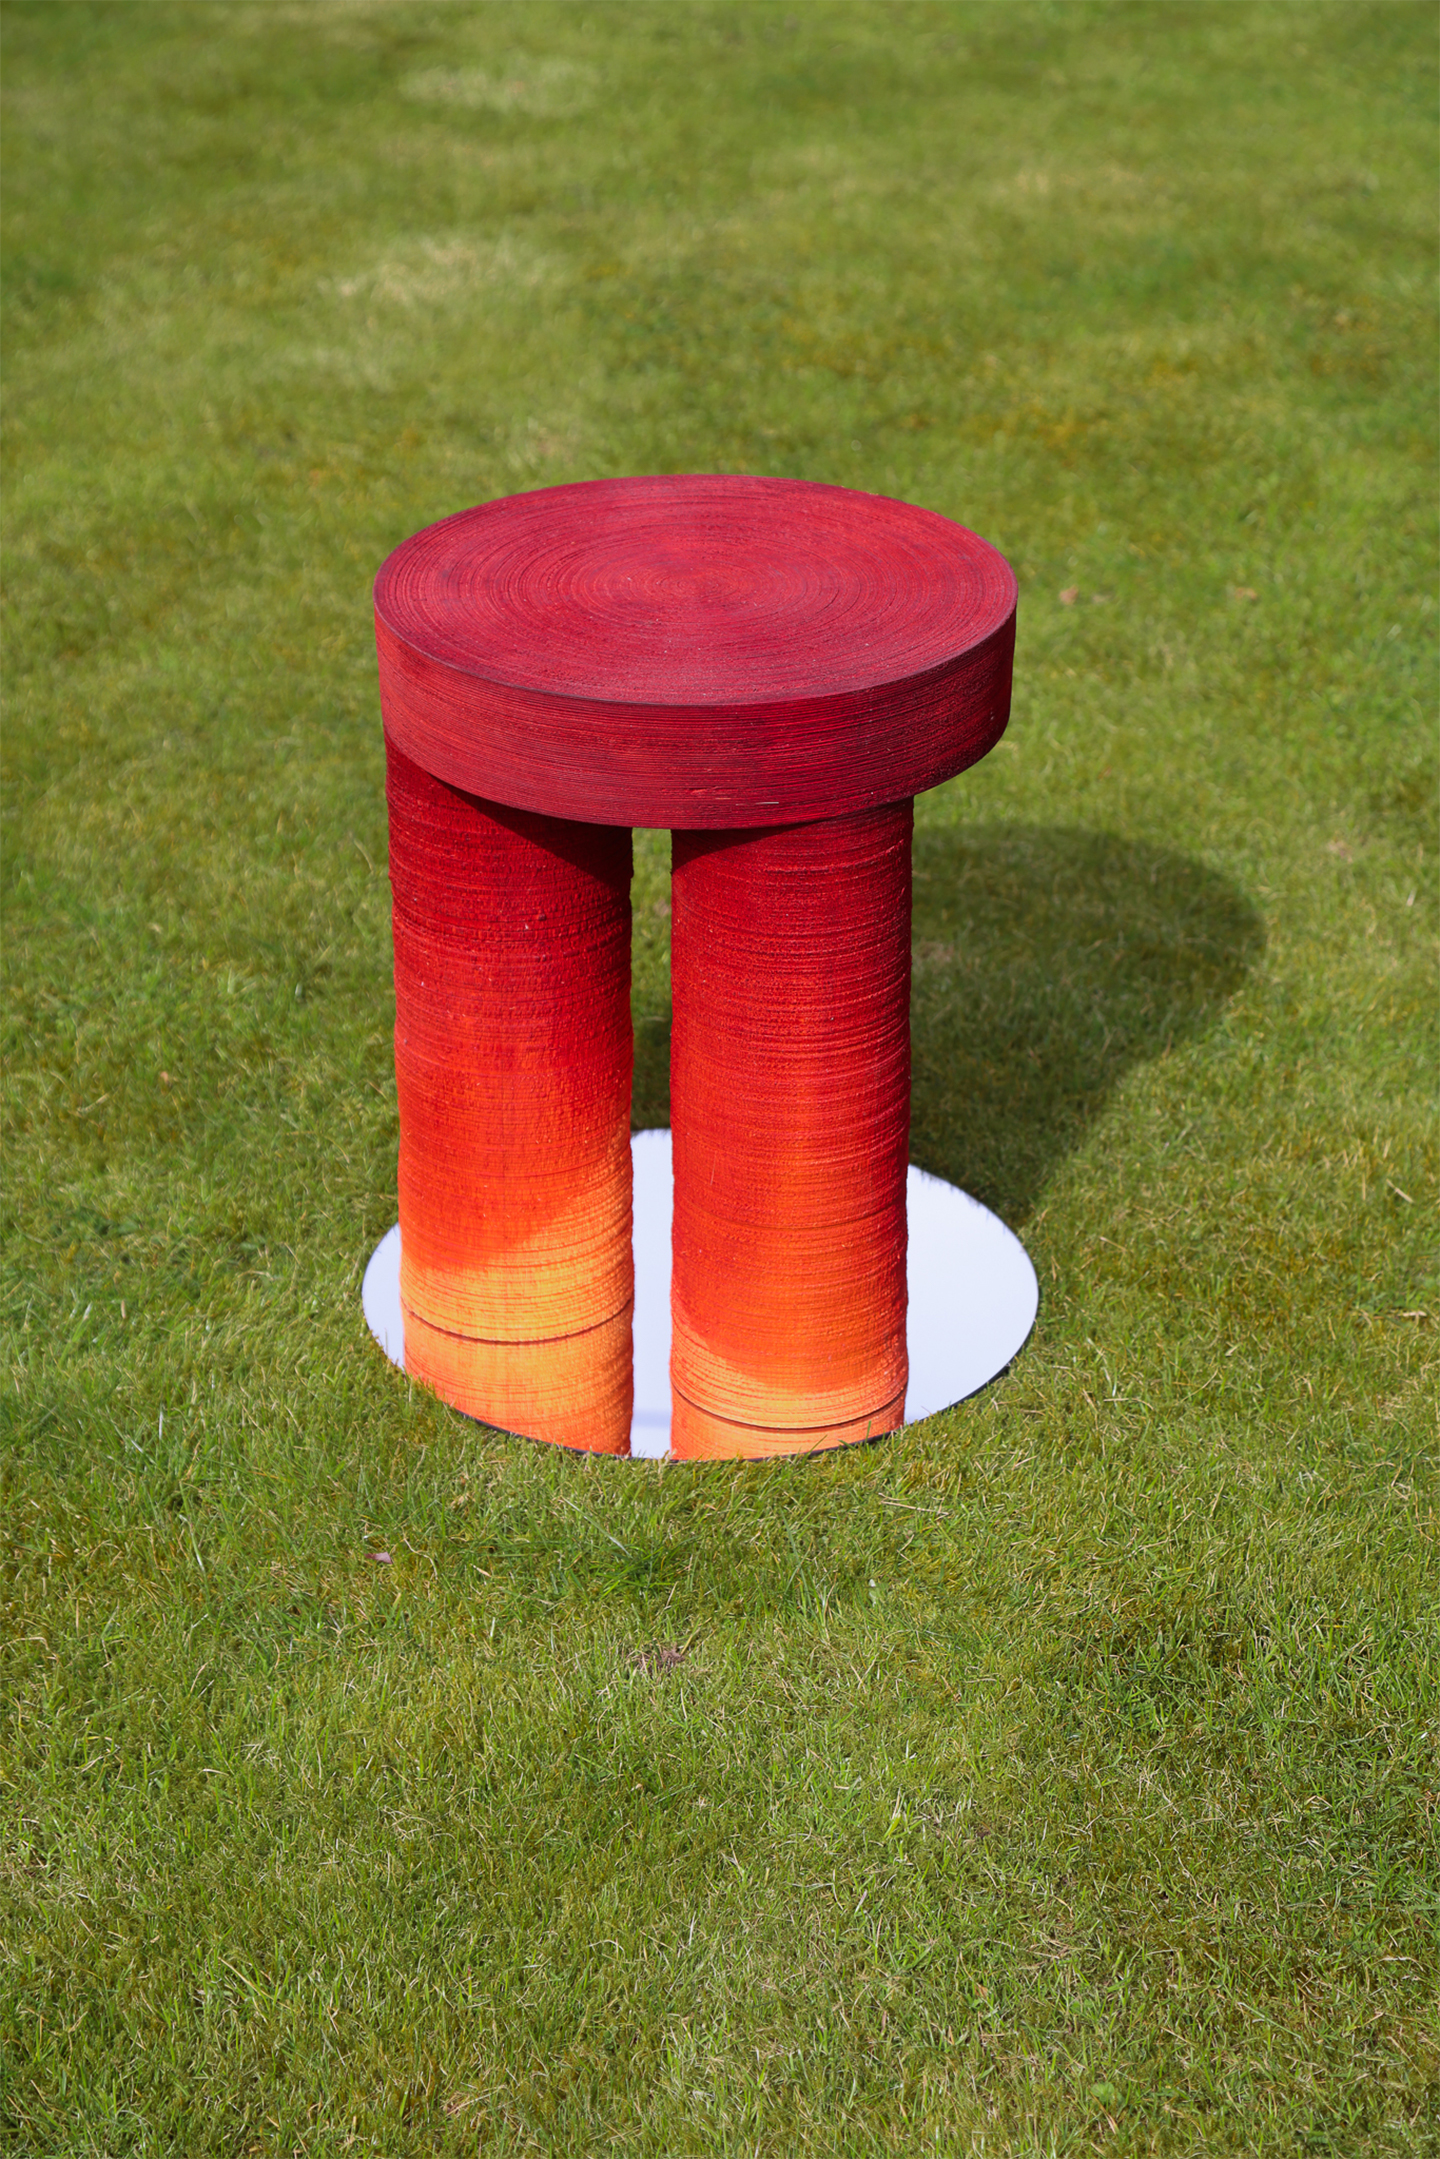 Turned red stool, 2022. Design by Marc Sweeney 